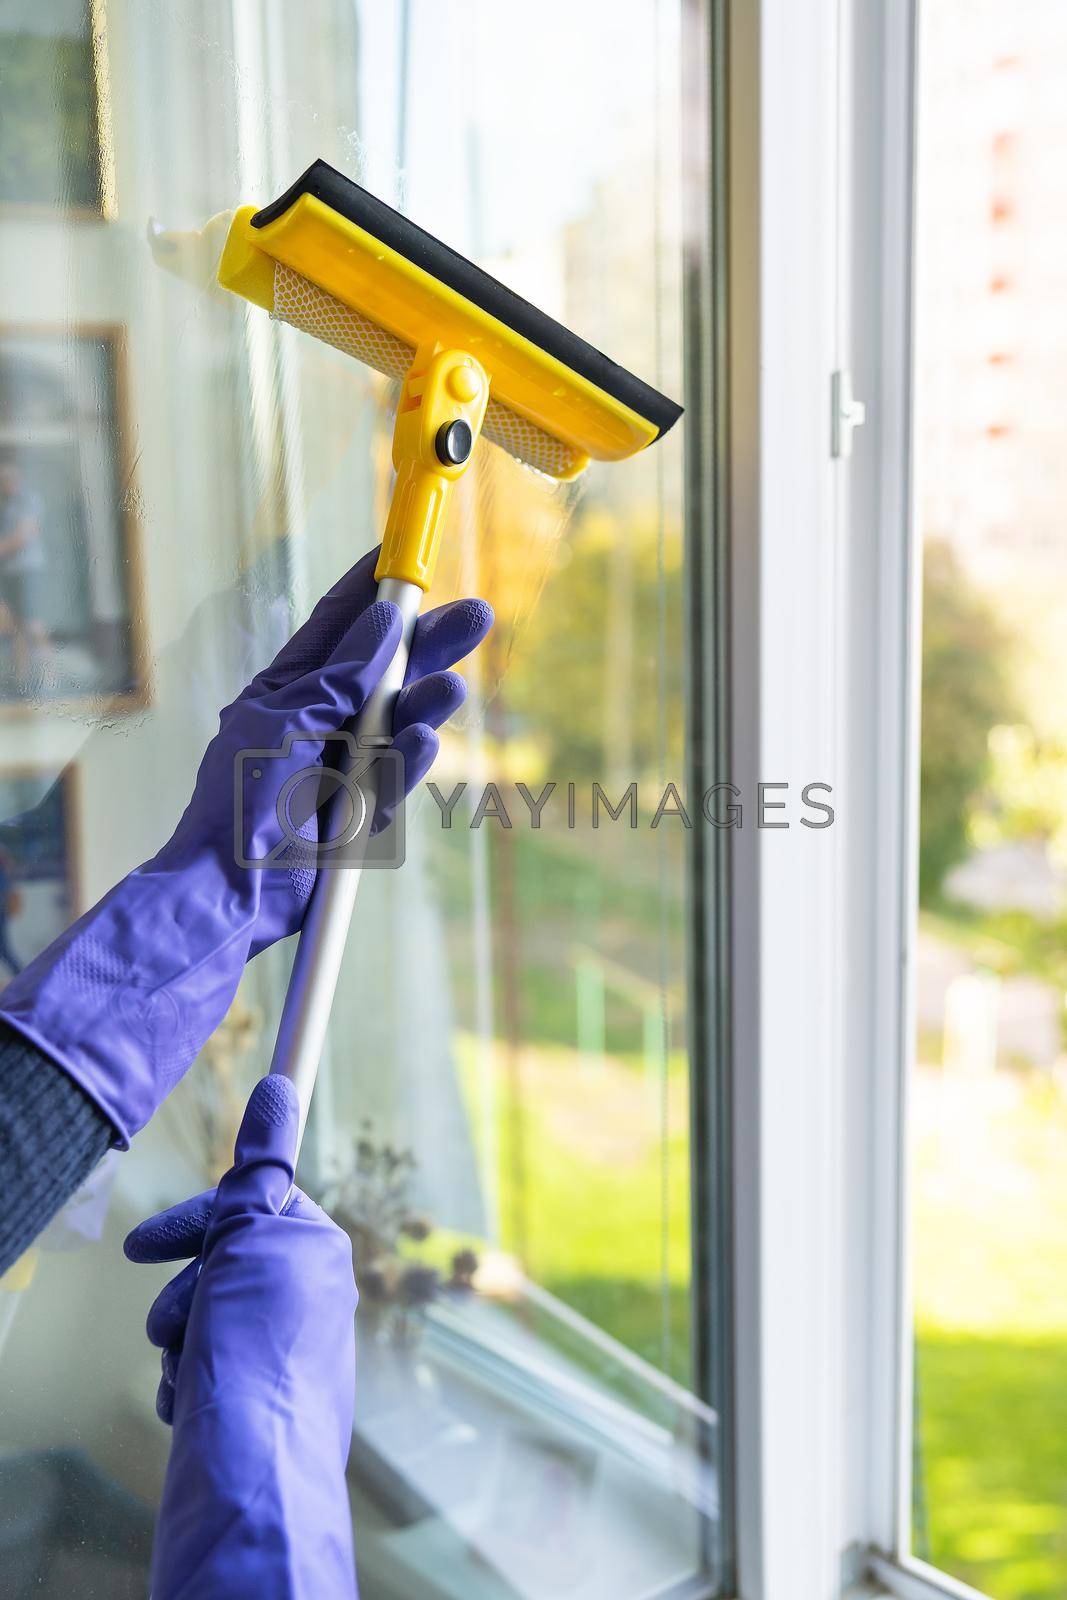 Royalty free image of House cleaning and cleaning concept. A young girl in purple gloves with a yellow mop in her hands washes the window. by sfinks